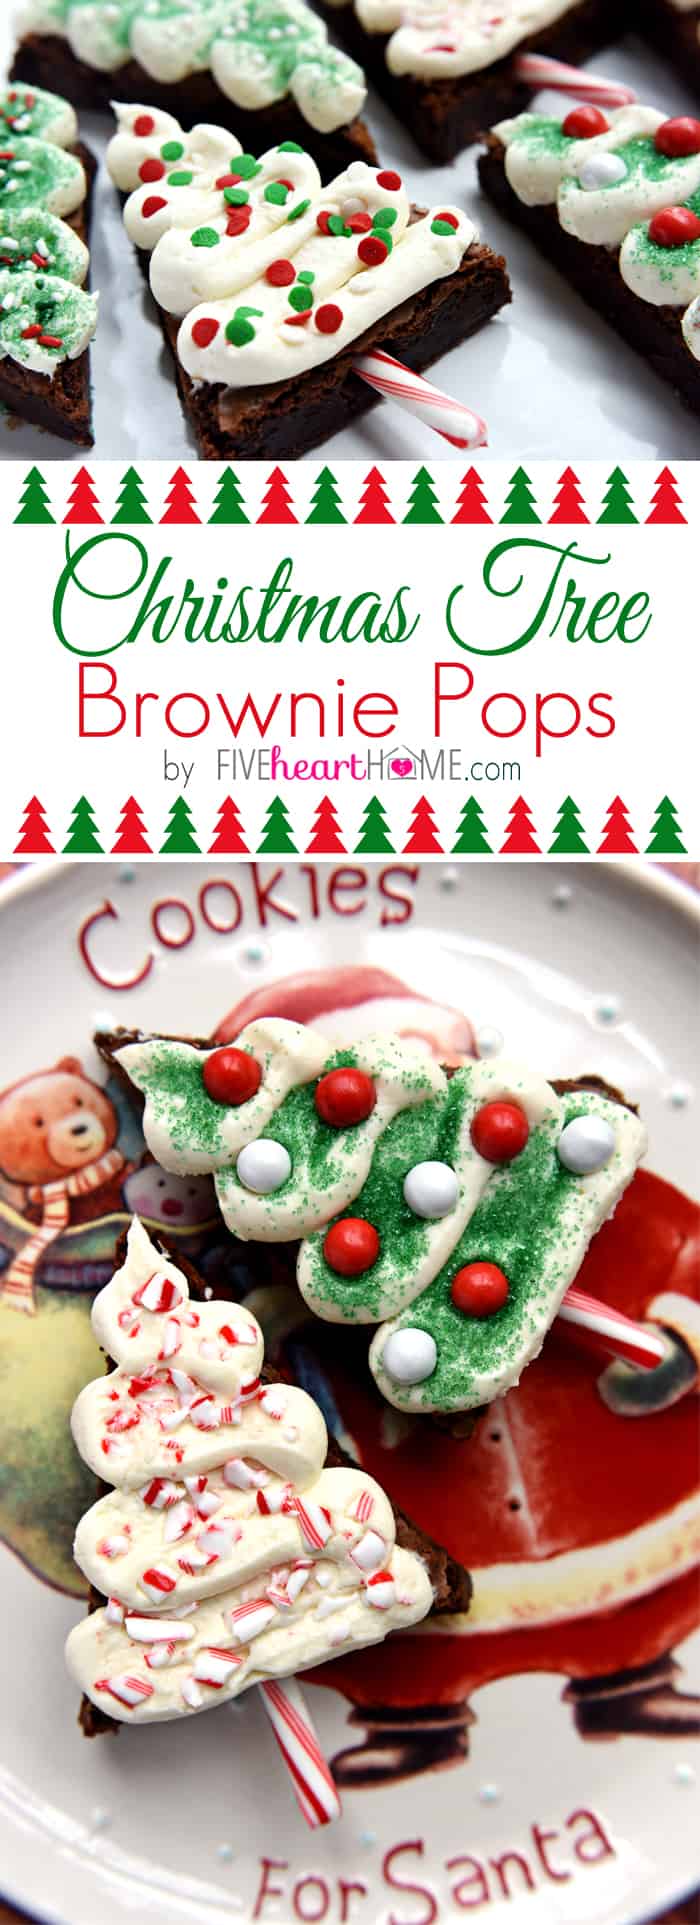 Christmas Tree Brownies, two-photo collage with text.